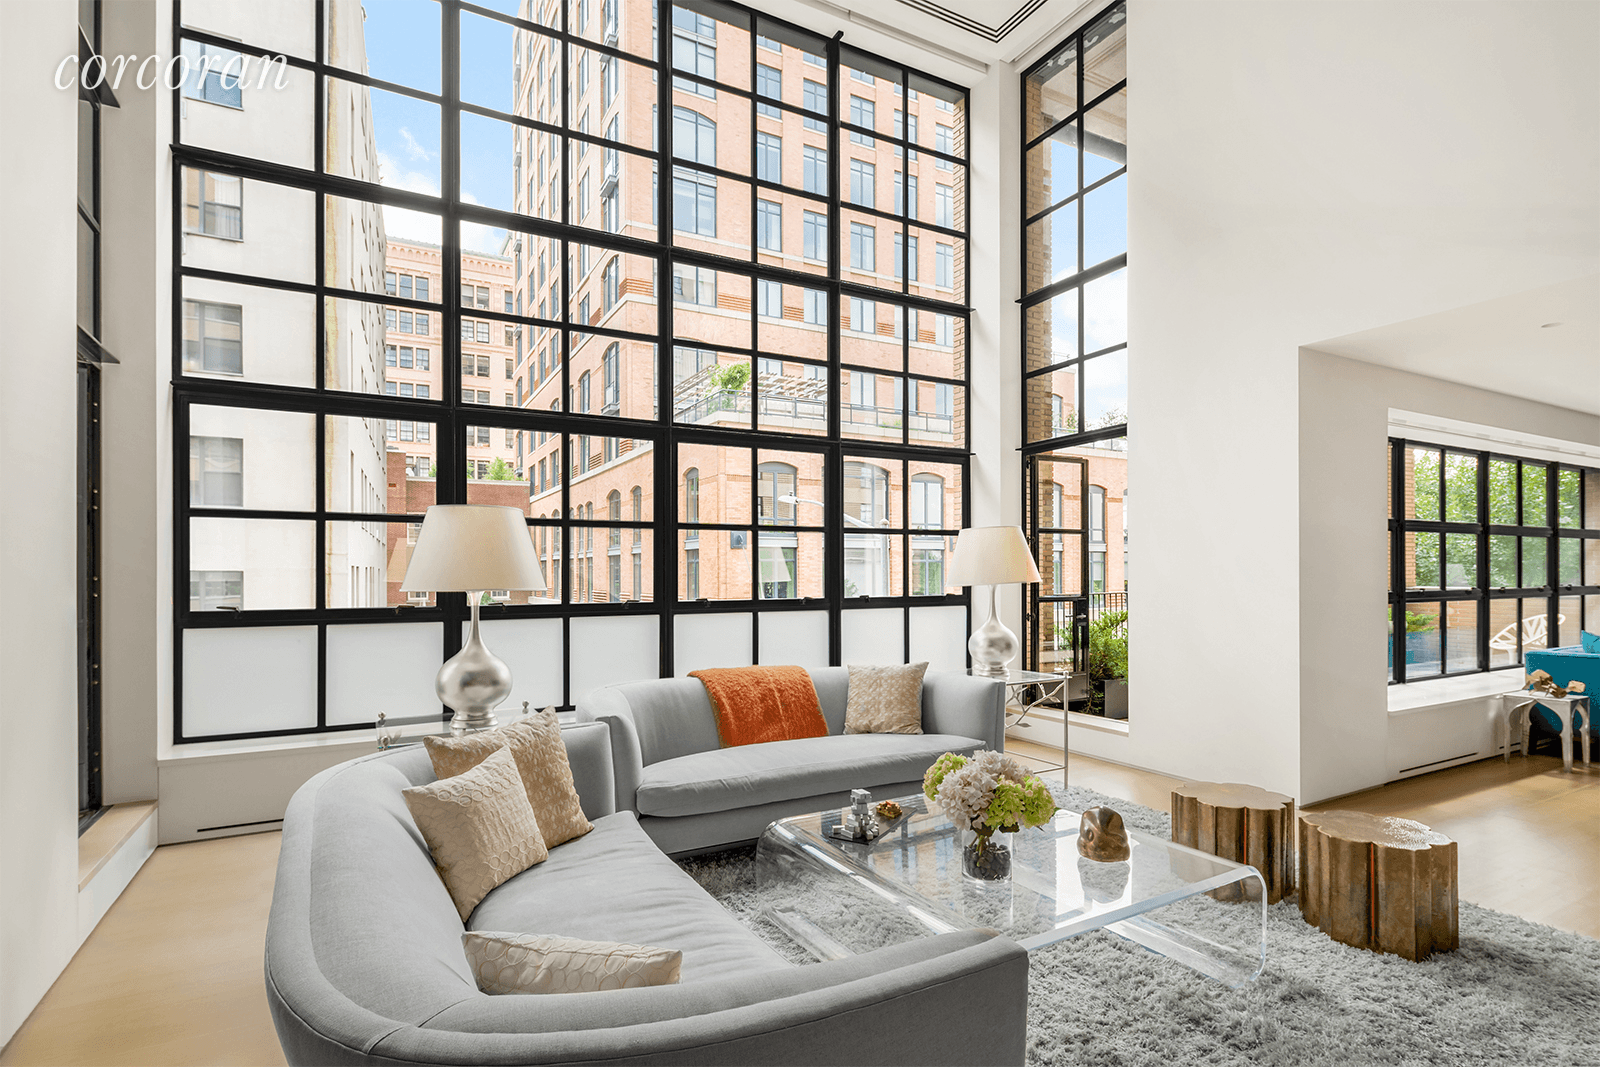 Elegance, glamour, and sweeping scale define this architecturally significant duplex located in the prime West Village, steps away from scenic Hudson River Park.